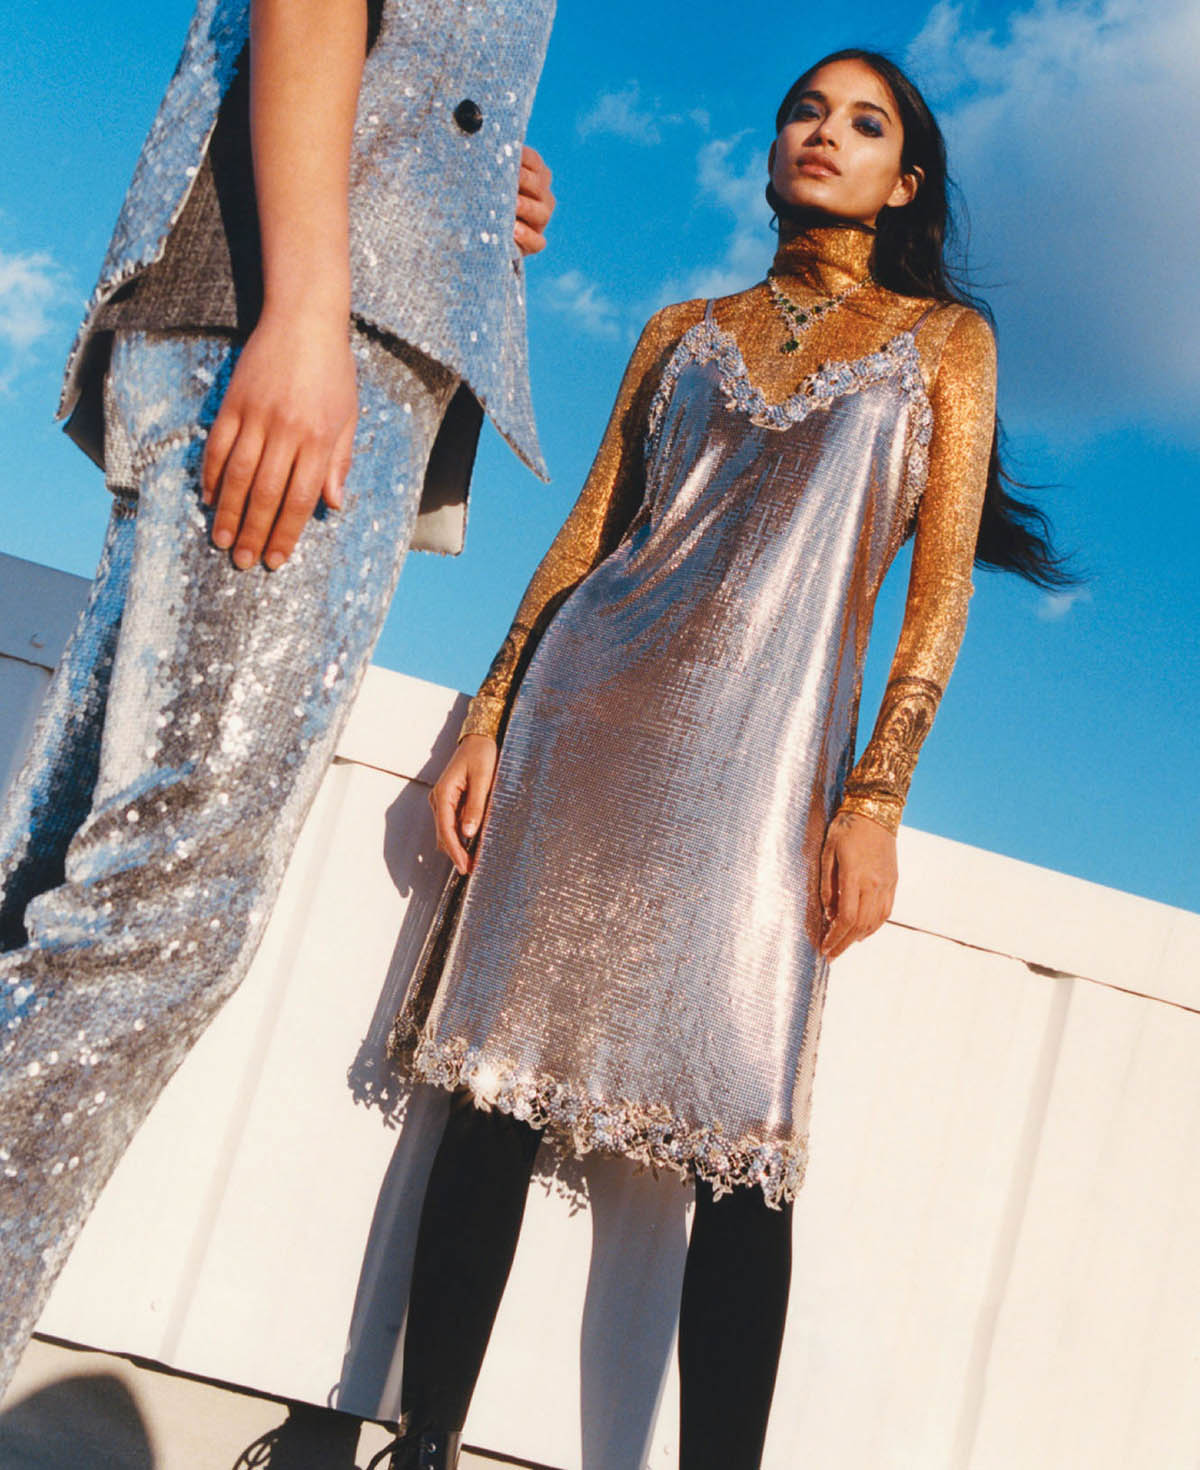 Amrit and Ylang by Roman Gallagher for Harper’s Bazaar US April 2021